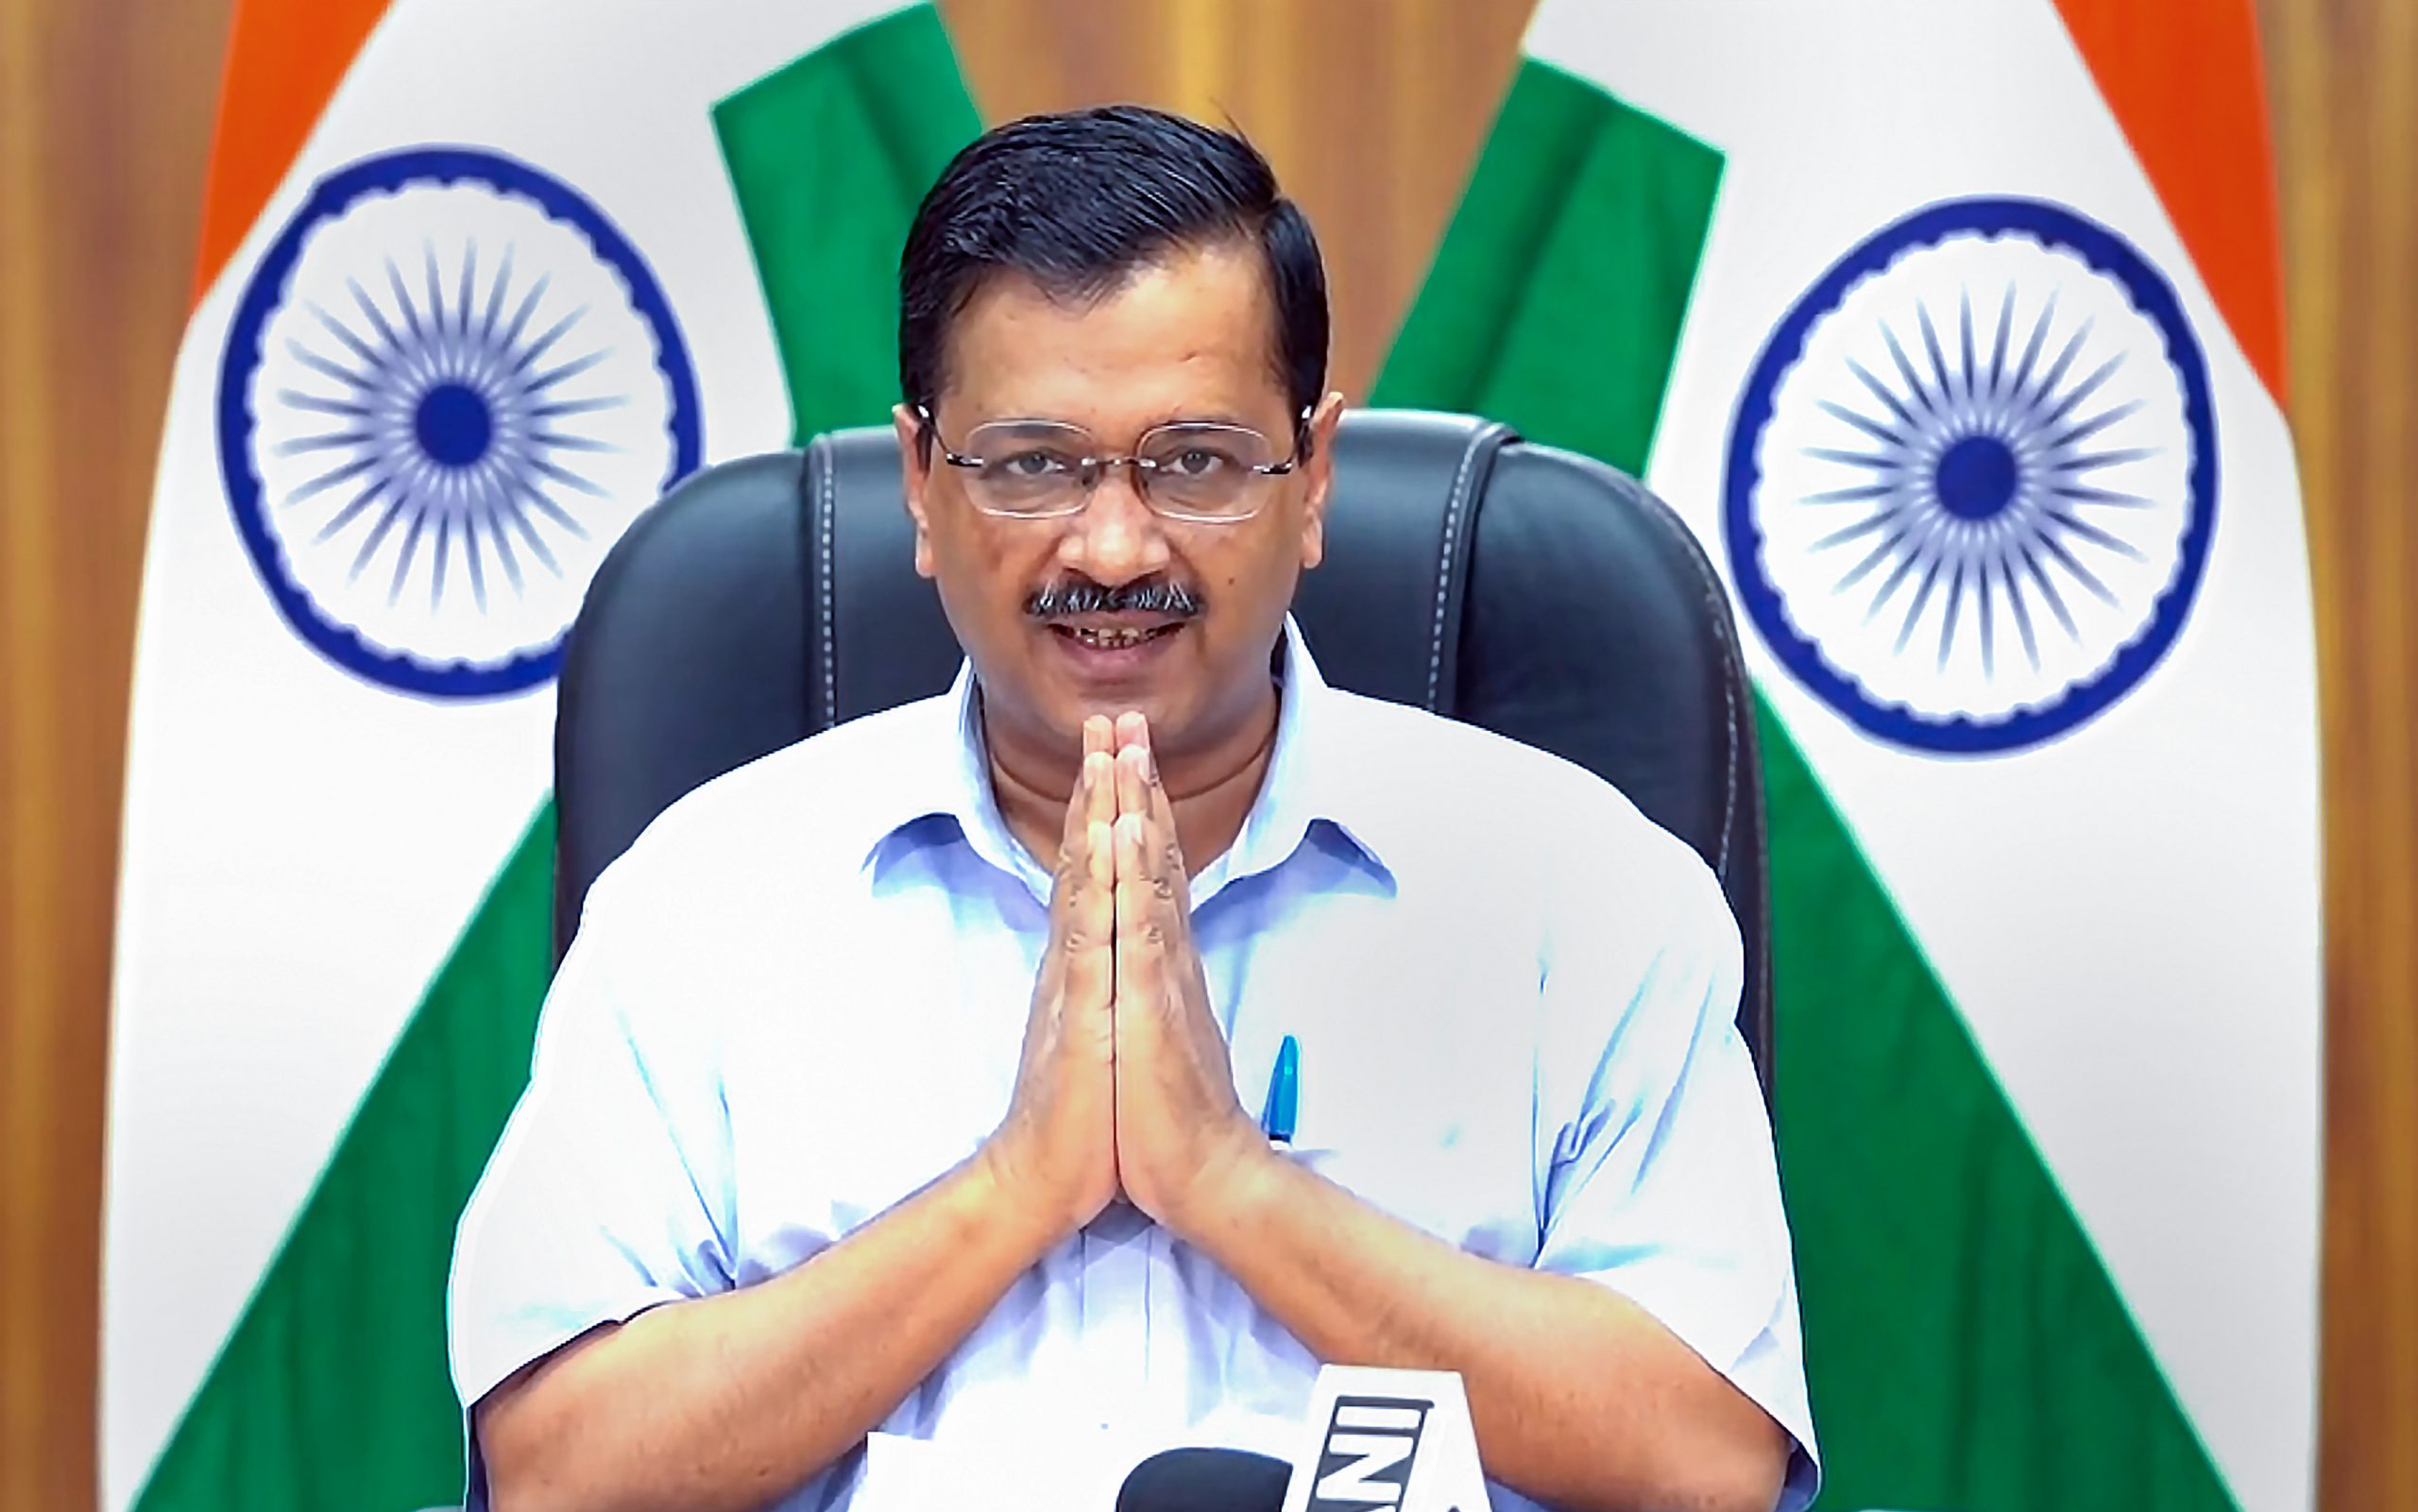 States’ fight for vaccine portrays ‘bad’ image of India: Arvind Kejriwal